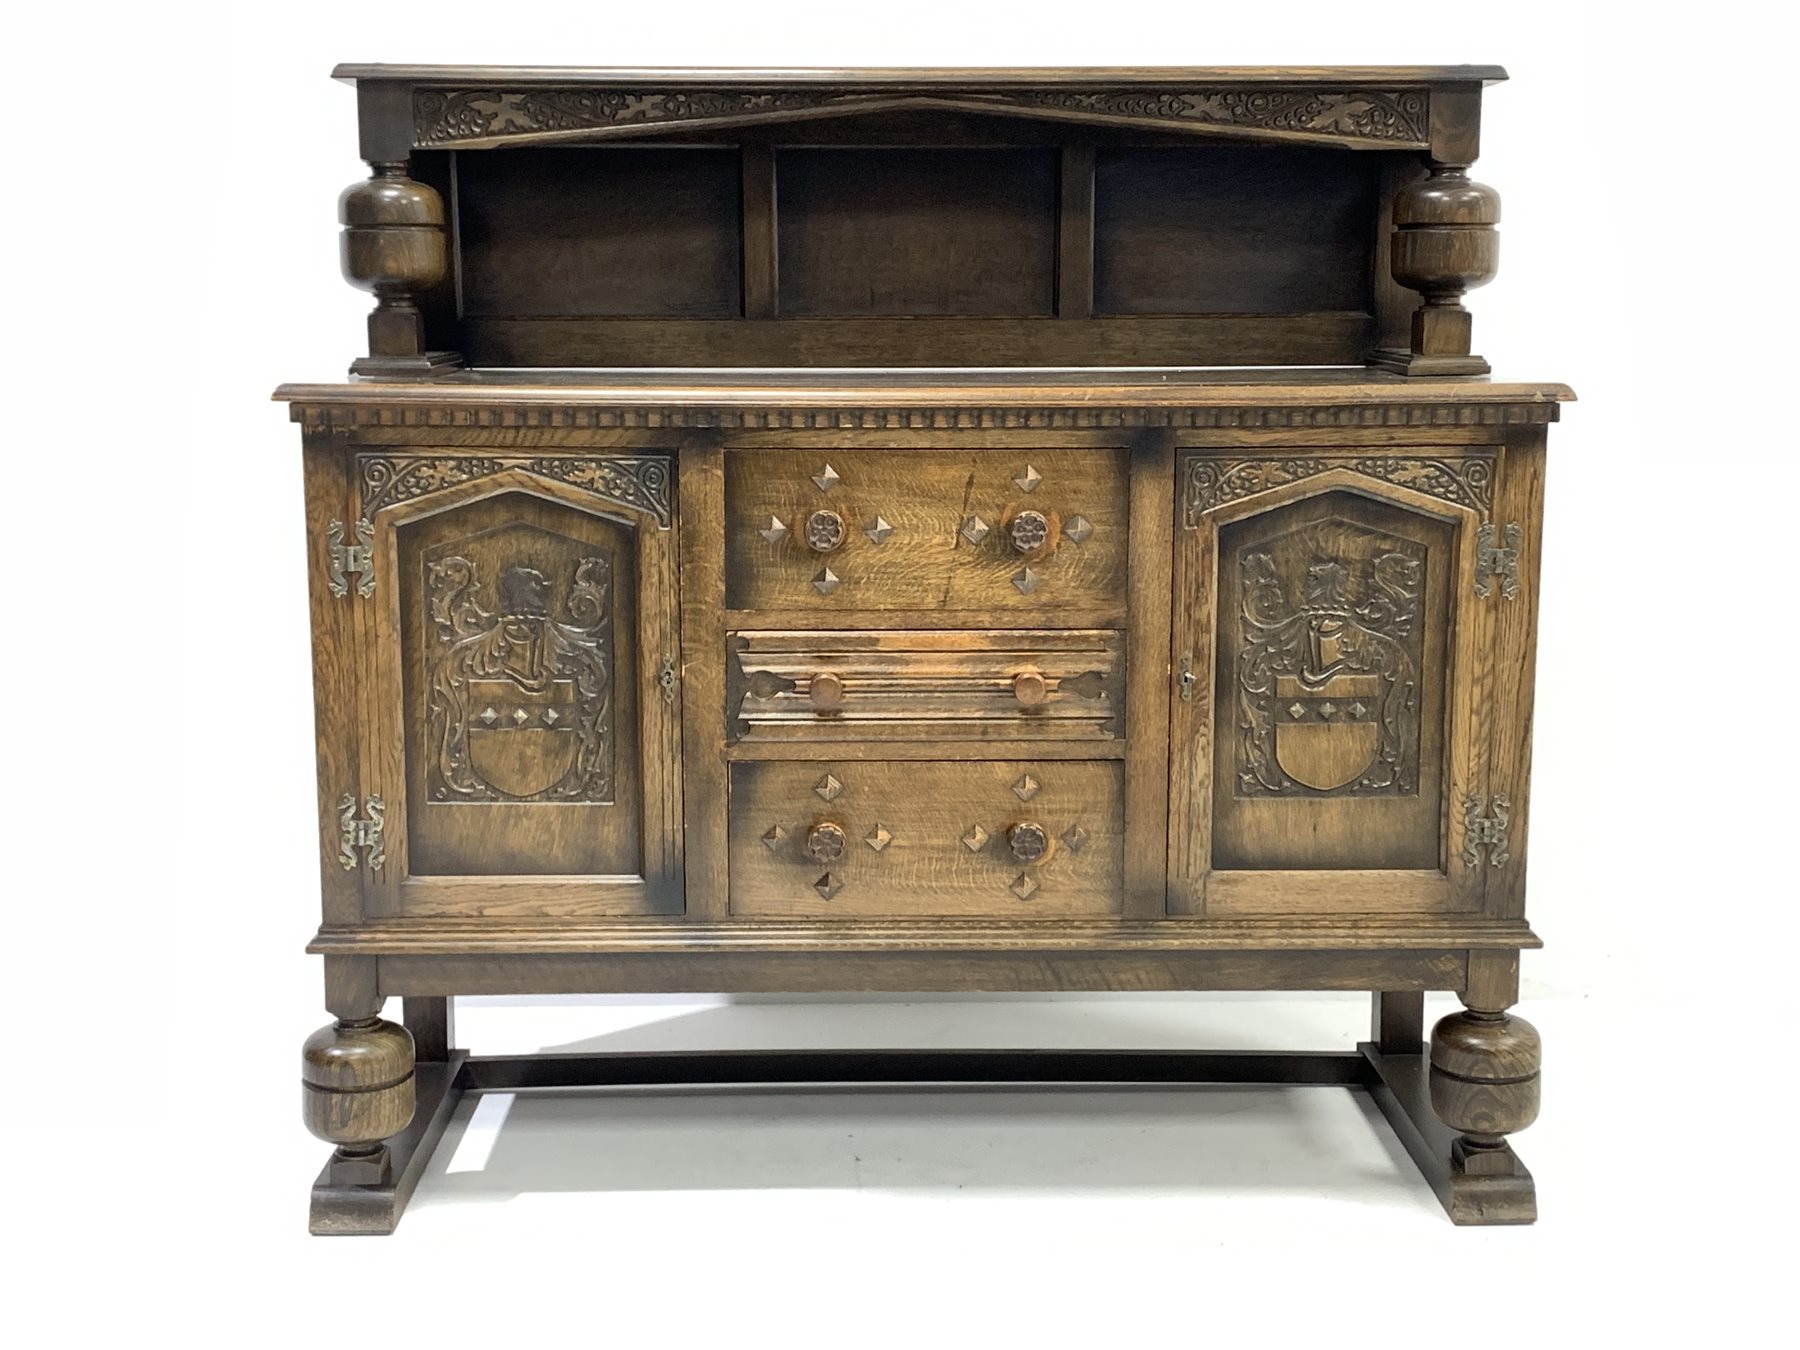 Early 20th century medium oak sideboard, raised back with floral carved frieze, two cupboards under